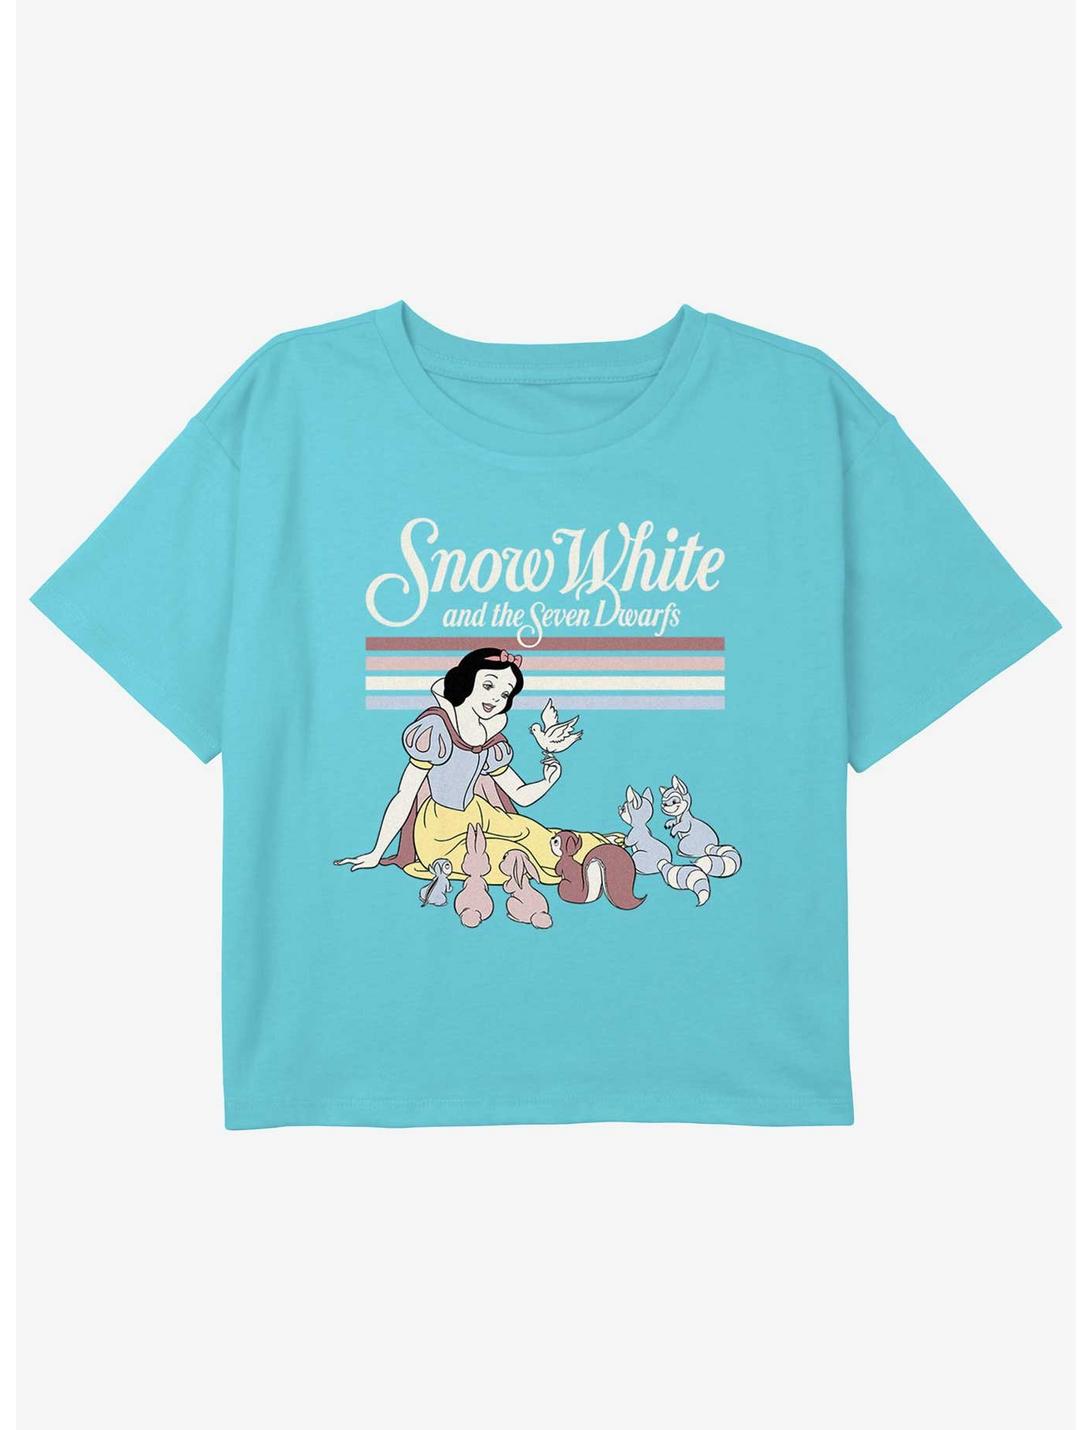 Disney Snow White and the Seven Dwarfs Forest Critters Girls Youth Crop T-Shirt, BLUE, hi-res